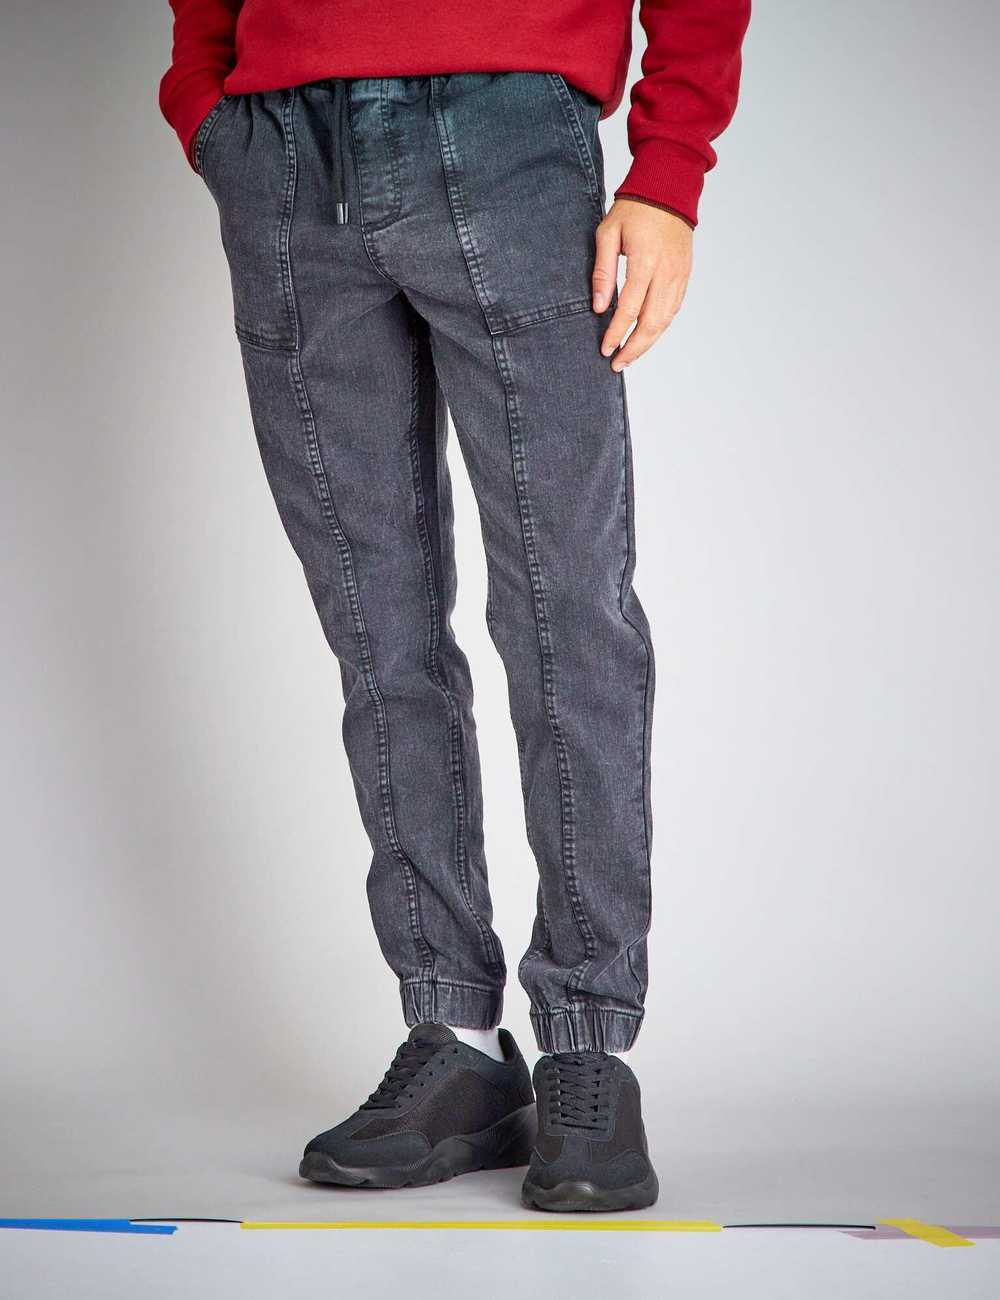 Buy Jogger-style jeans with elasticated waist Online in Dubai & the  UAE